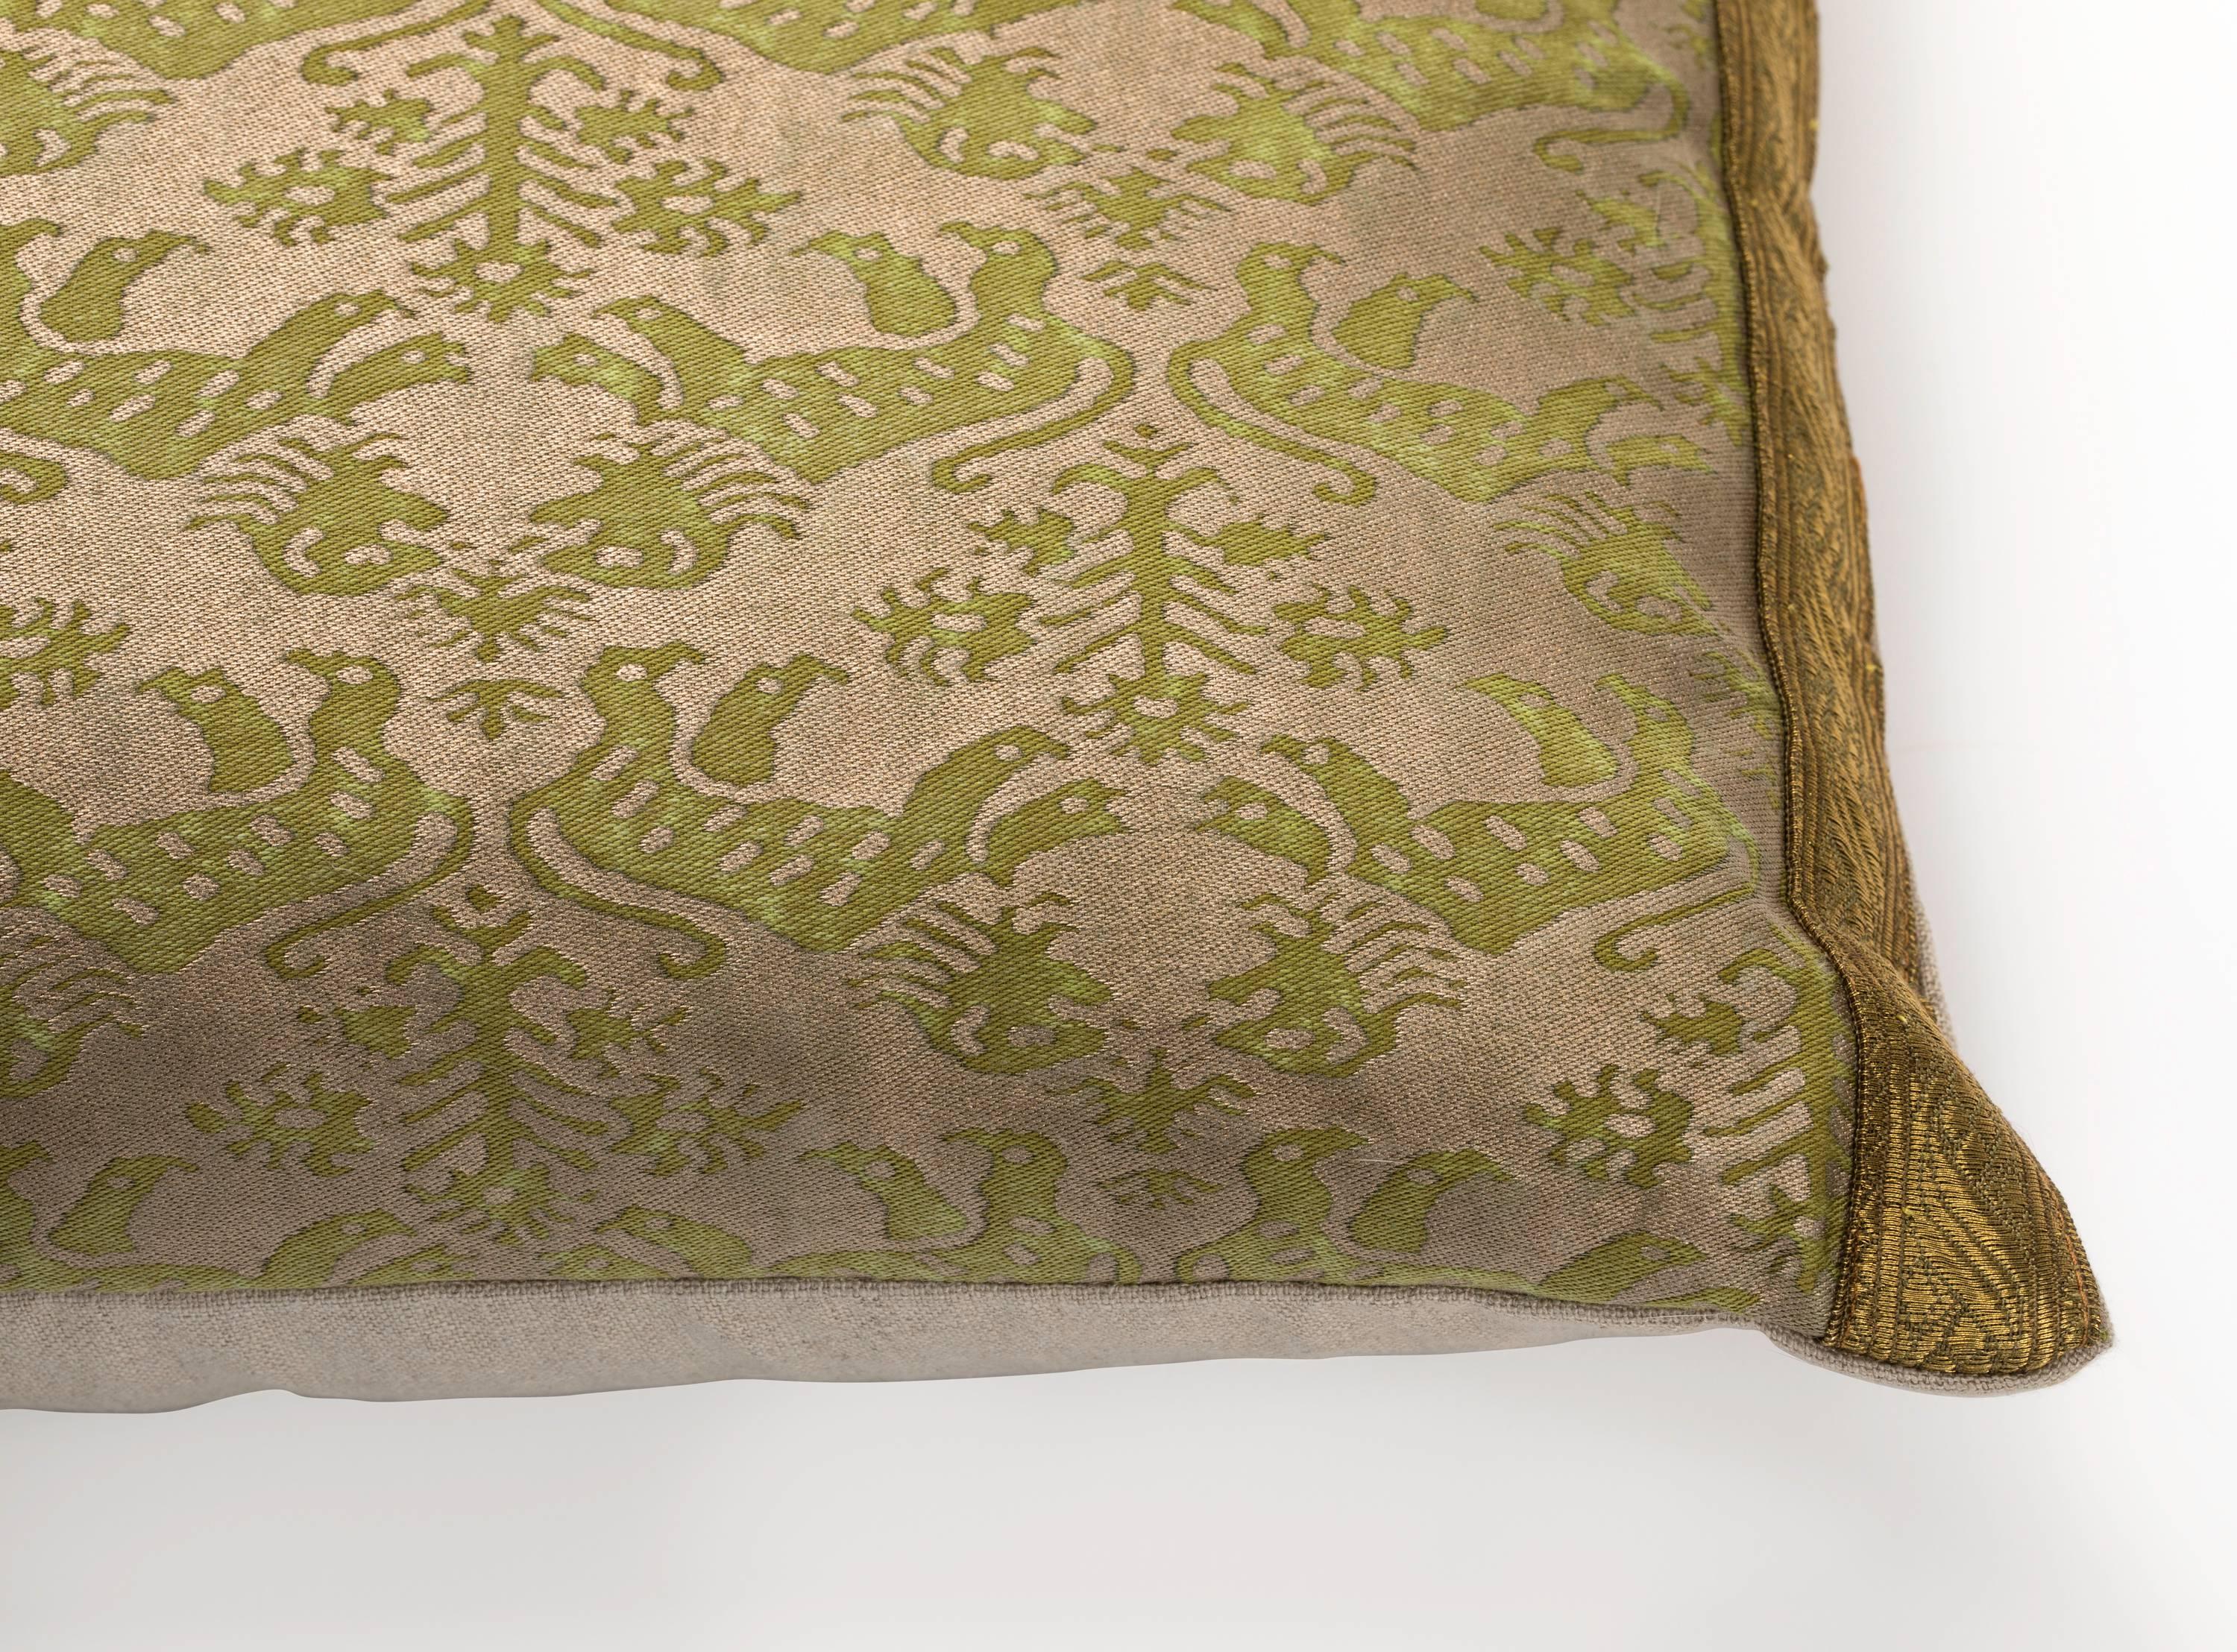 Silk Vintage Fortuny Pillow